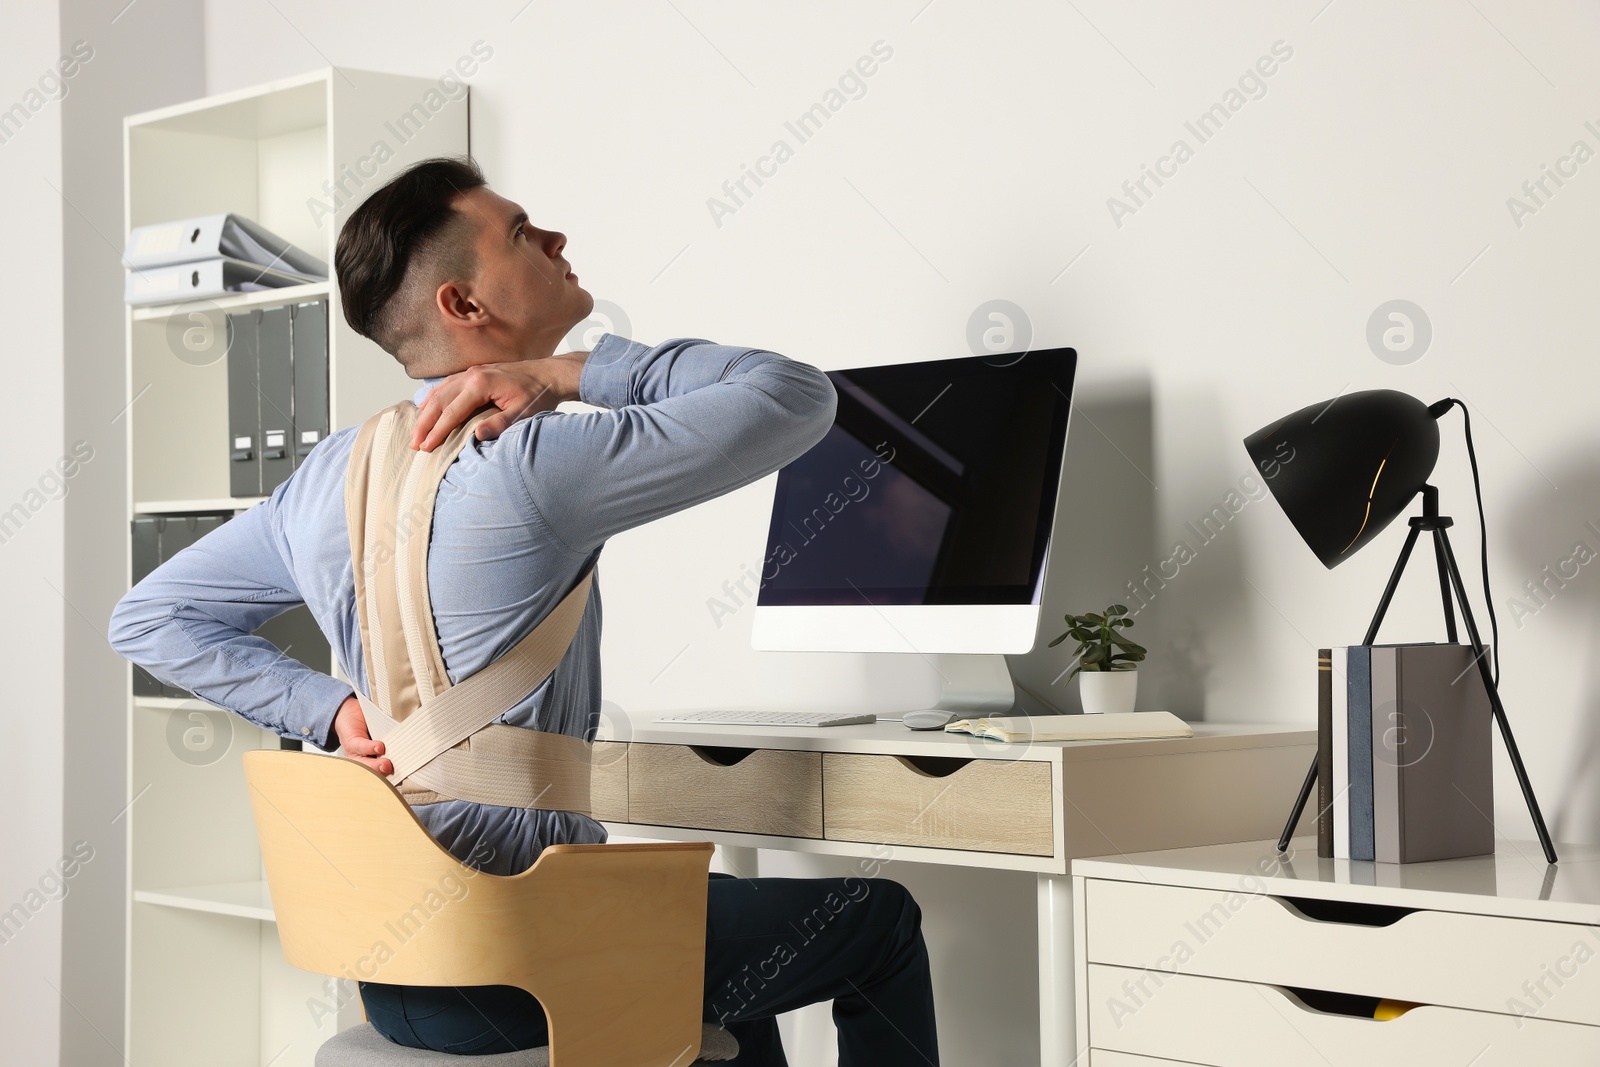 Photo of Man with orthopedic corset working on computer in room